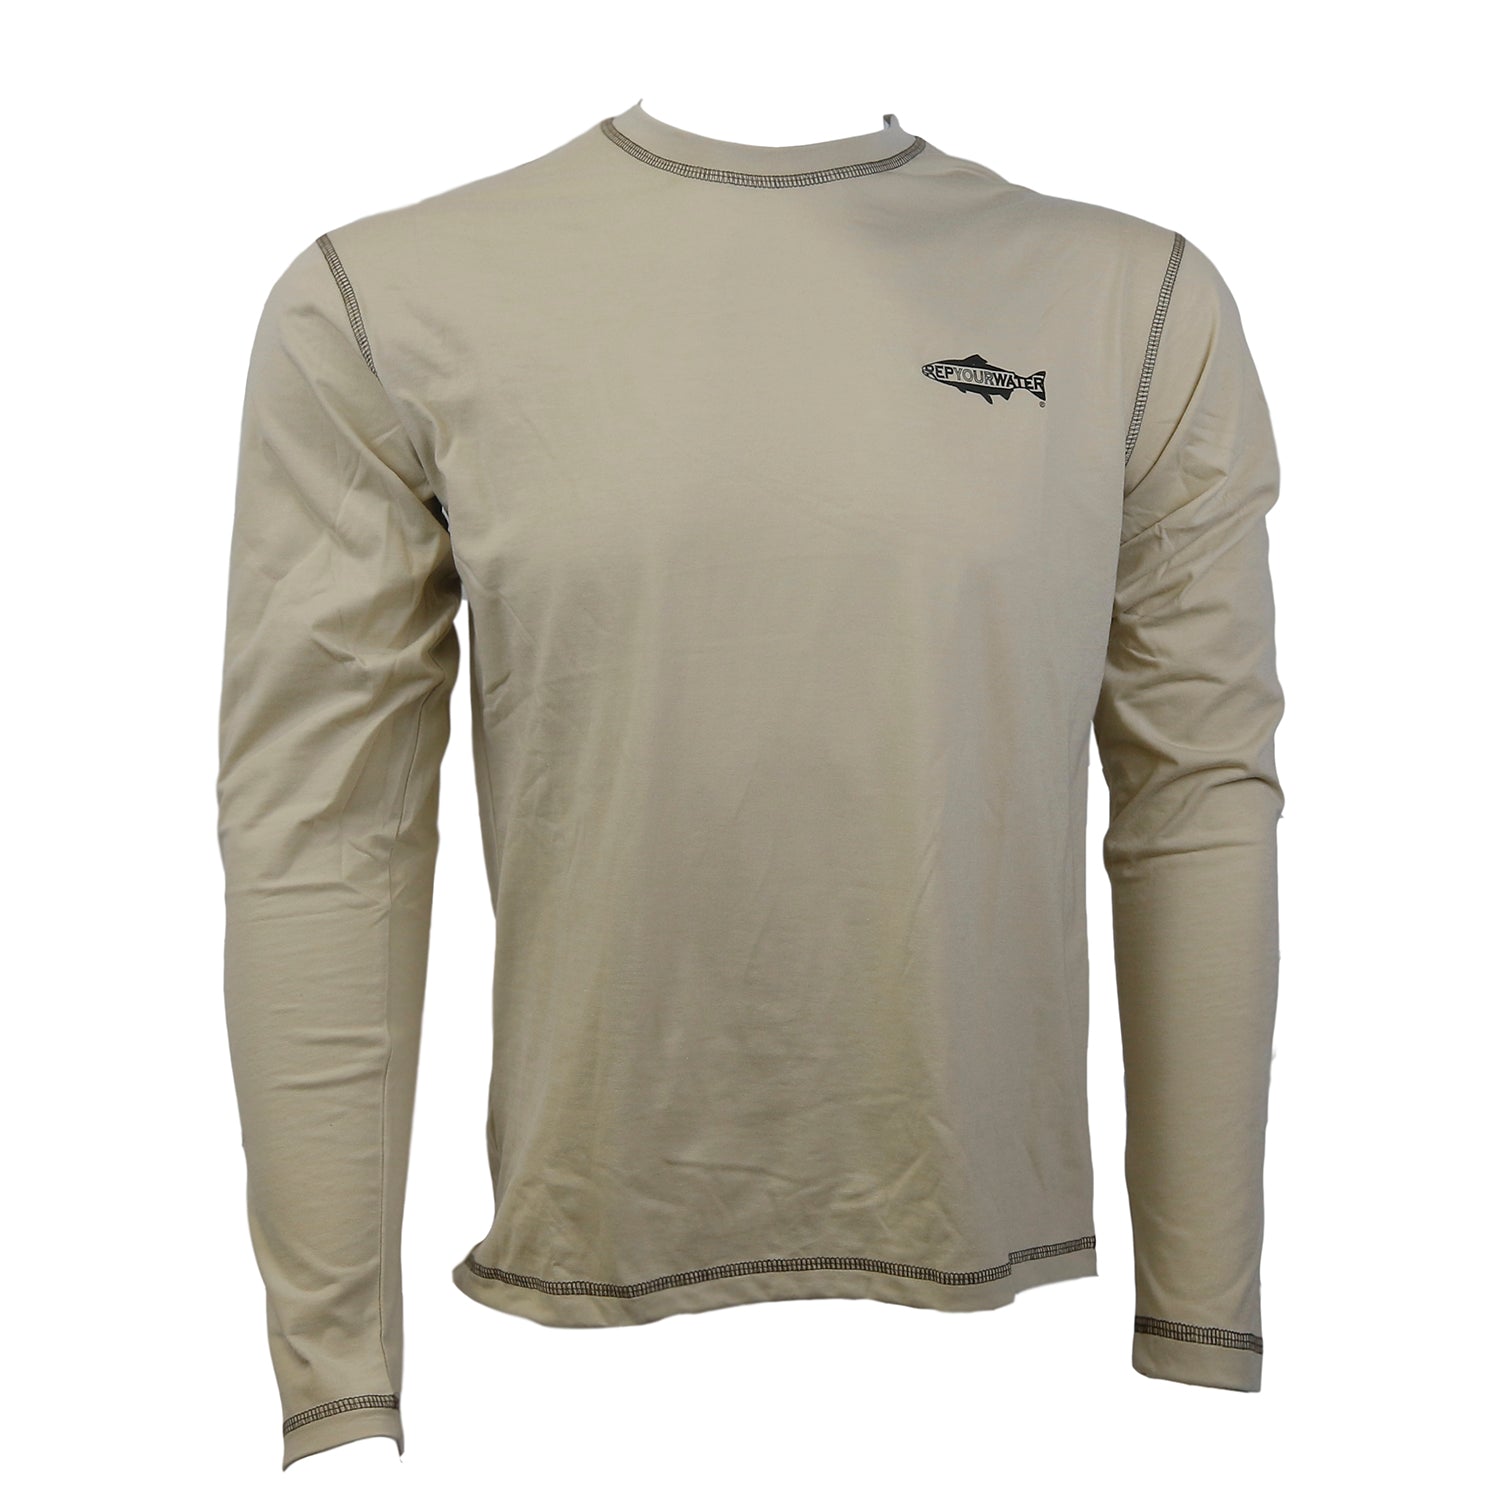 A tan longsleeved shirt shown in the front with and a logo that says repyourwater inside a trout silhouette on the chest